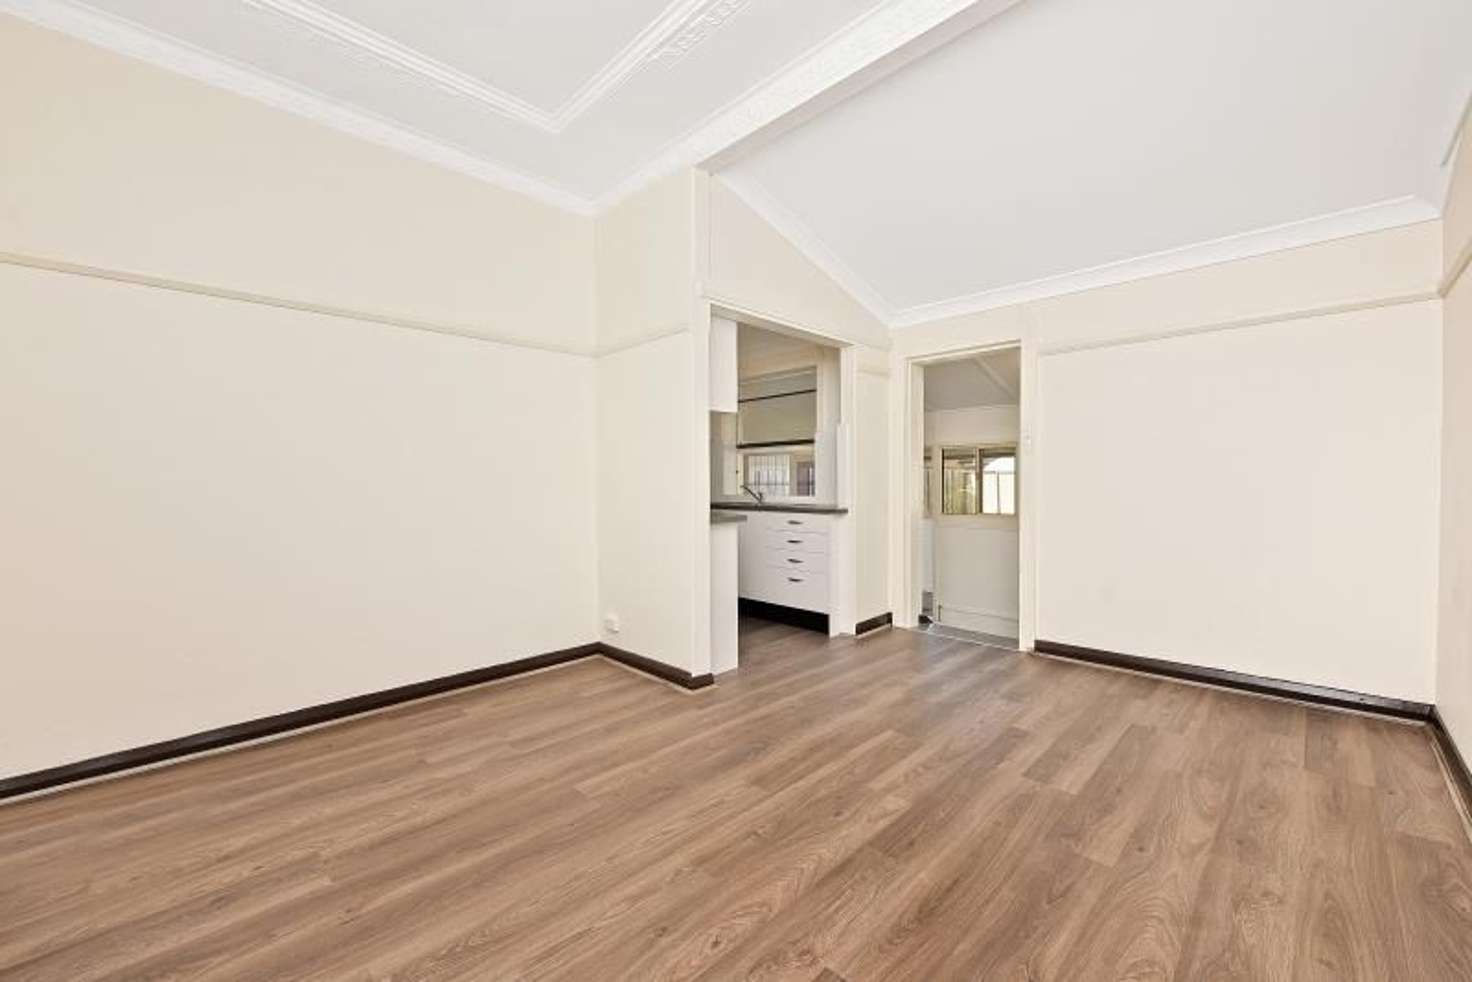 Main view of Homely house listing, 1370 Botany Road, Botany NSW 2019